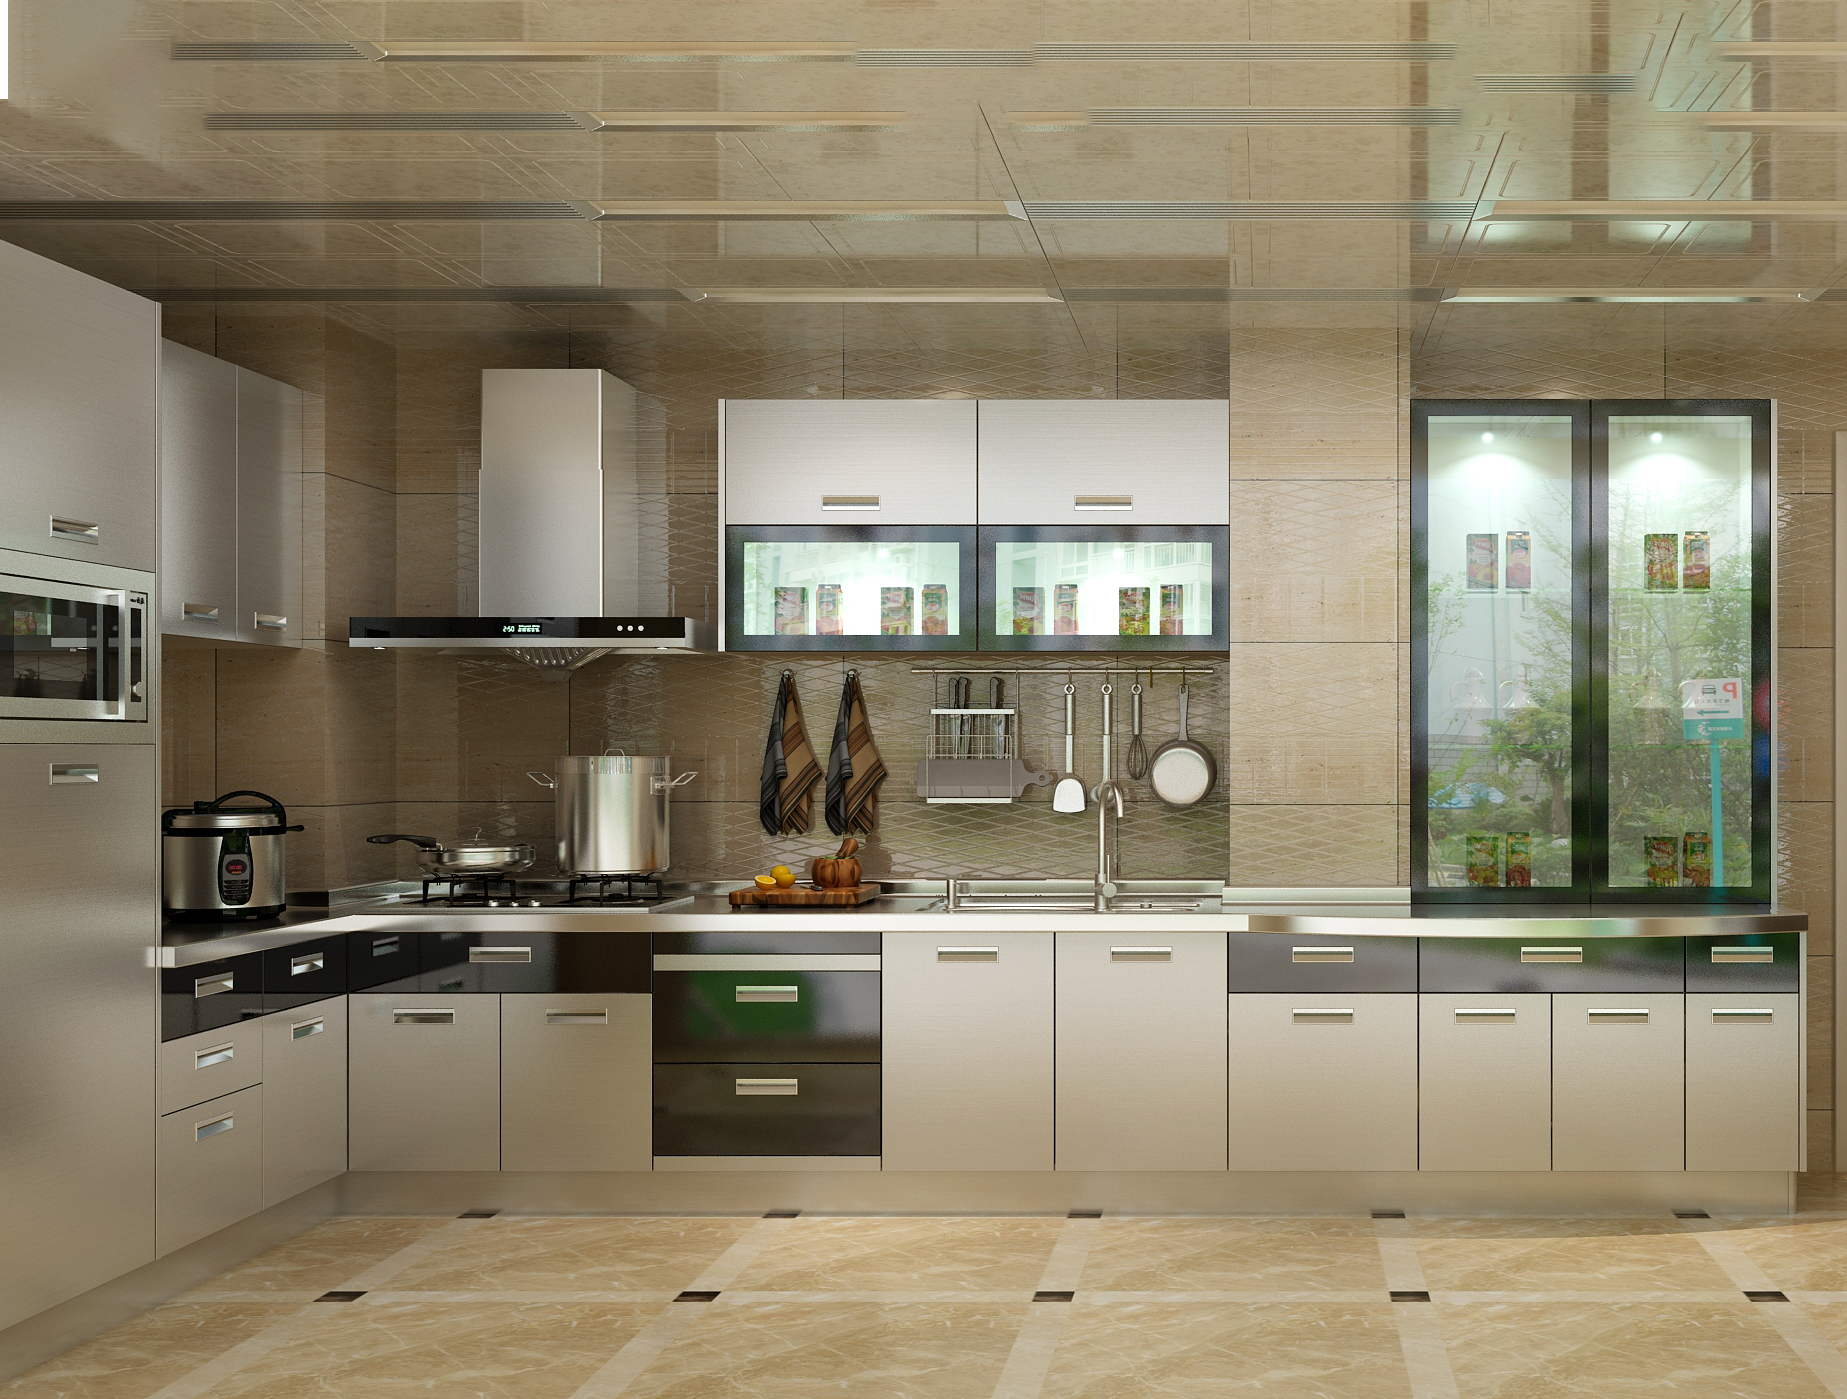 High Quality Stainless Steel Kitchen Cabinet in Brushed Finish Featured Image